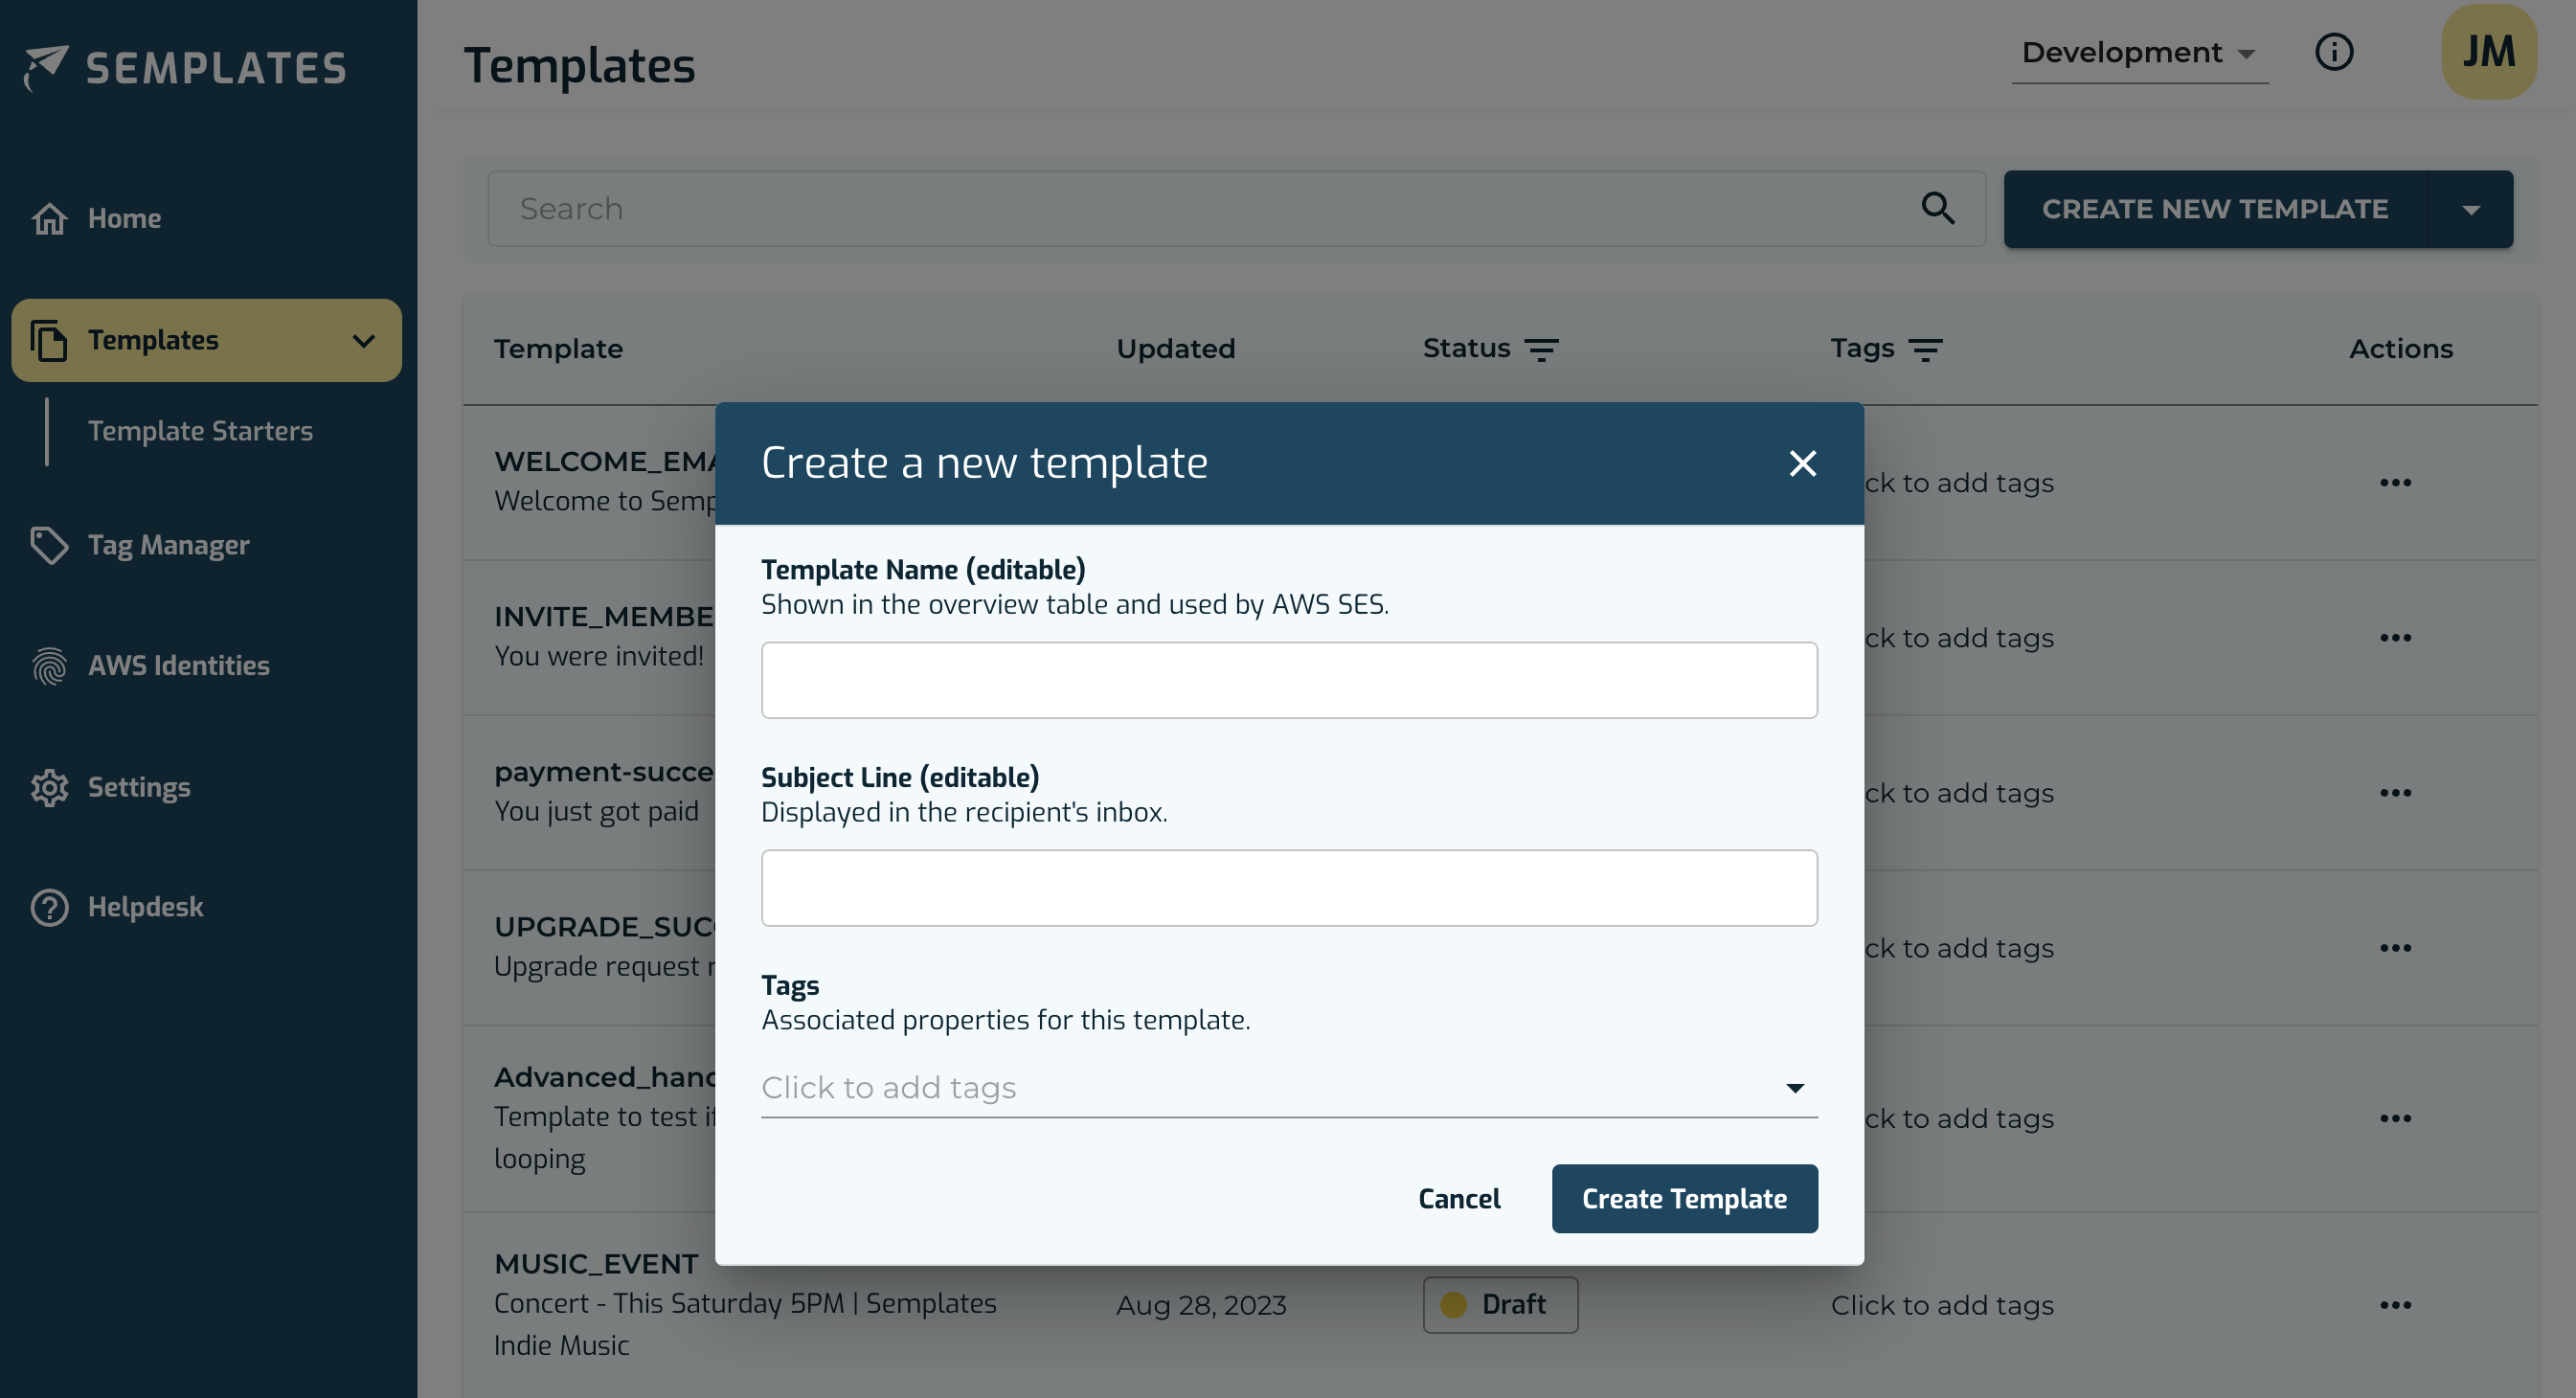 Create a new Template within your Semplates Account